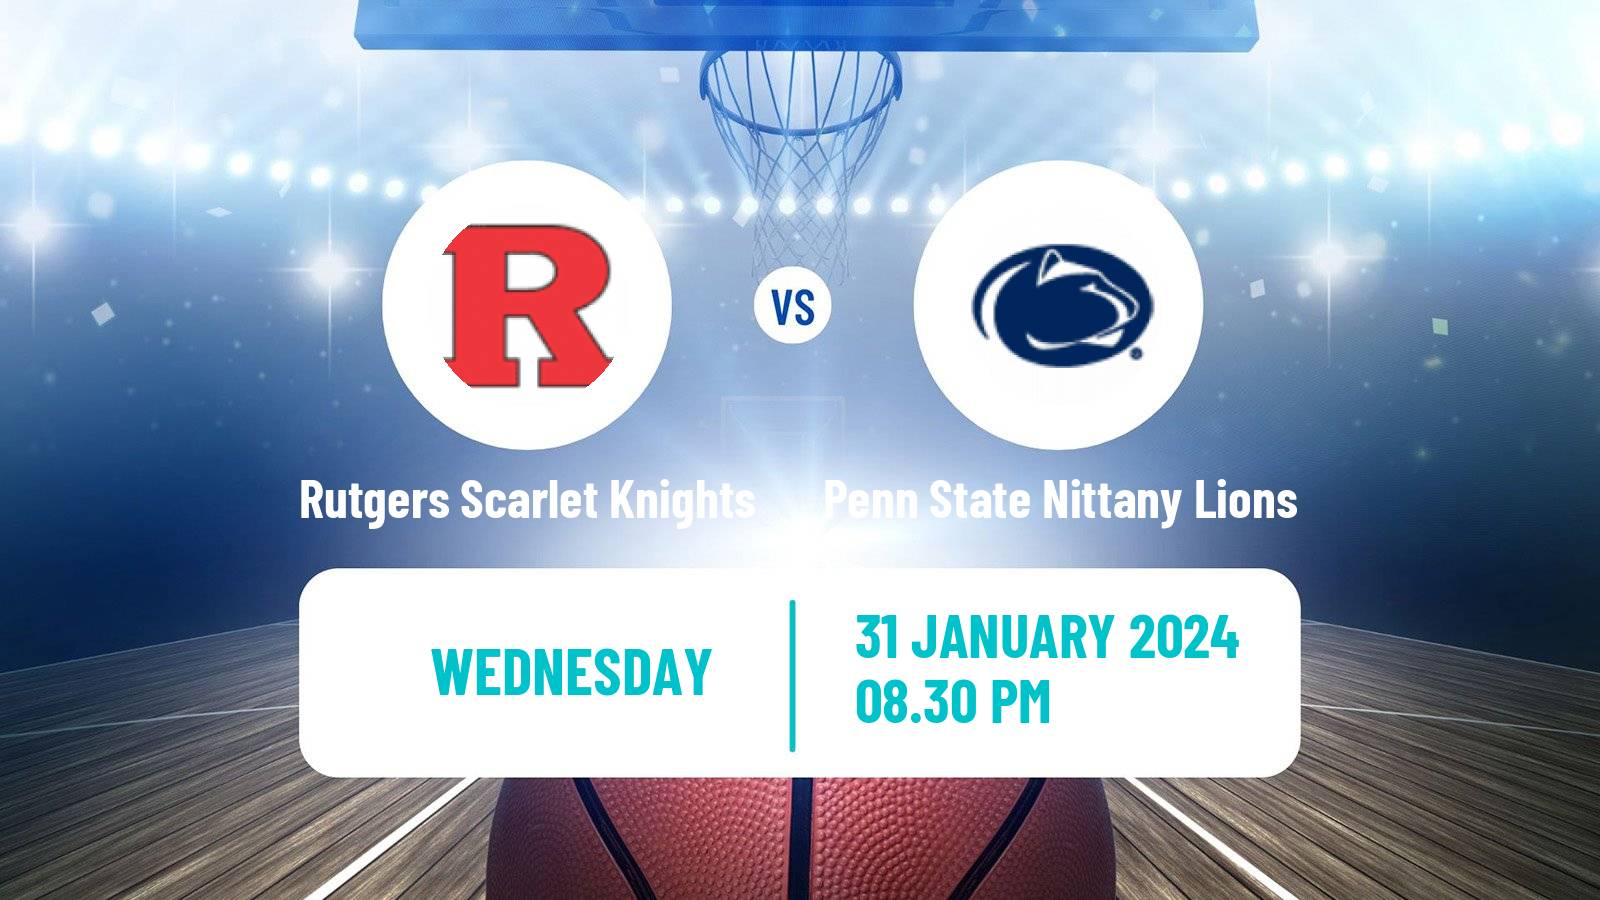 Basketball NCAA College Basketball Rutgers Scarlet Knights - Penn State Nittany Lions